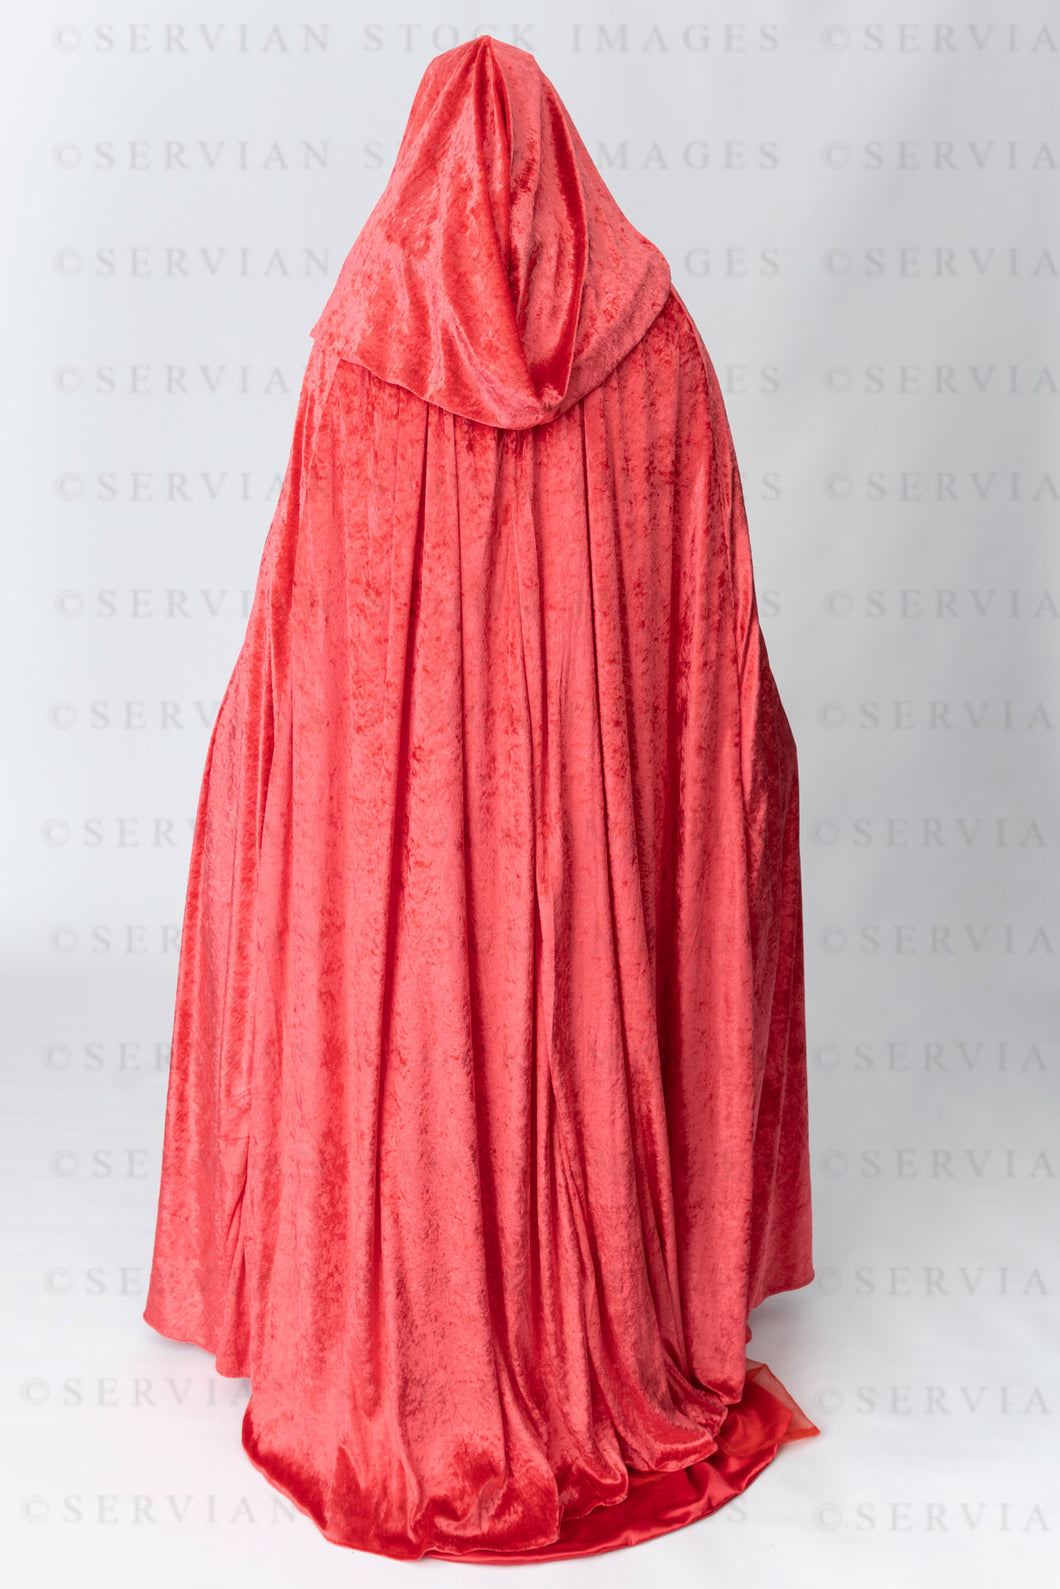 Medieval or High fantasy woman in a long red velvet cloak shown from back view (Katherine 5059)